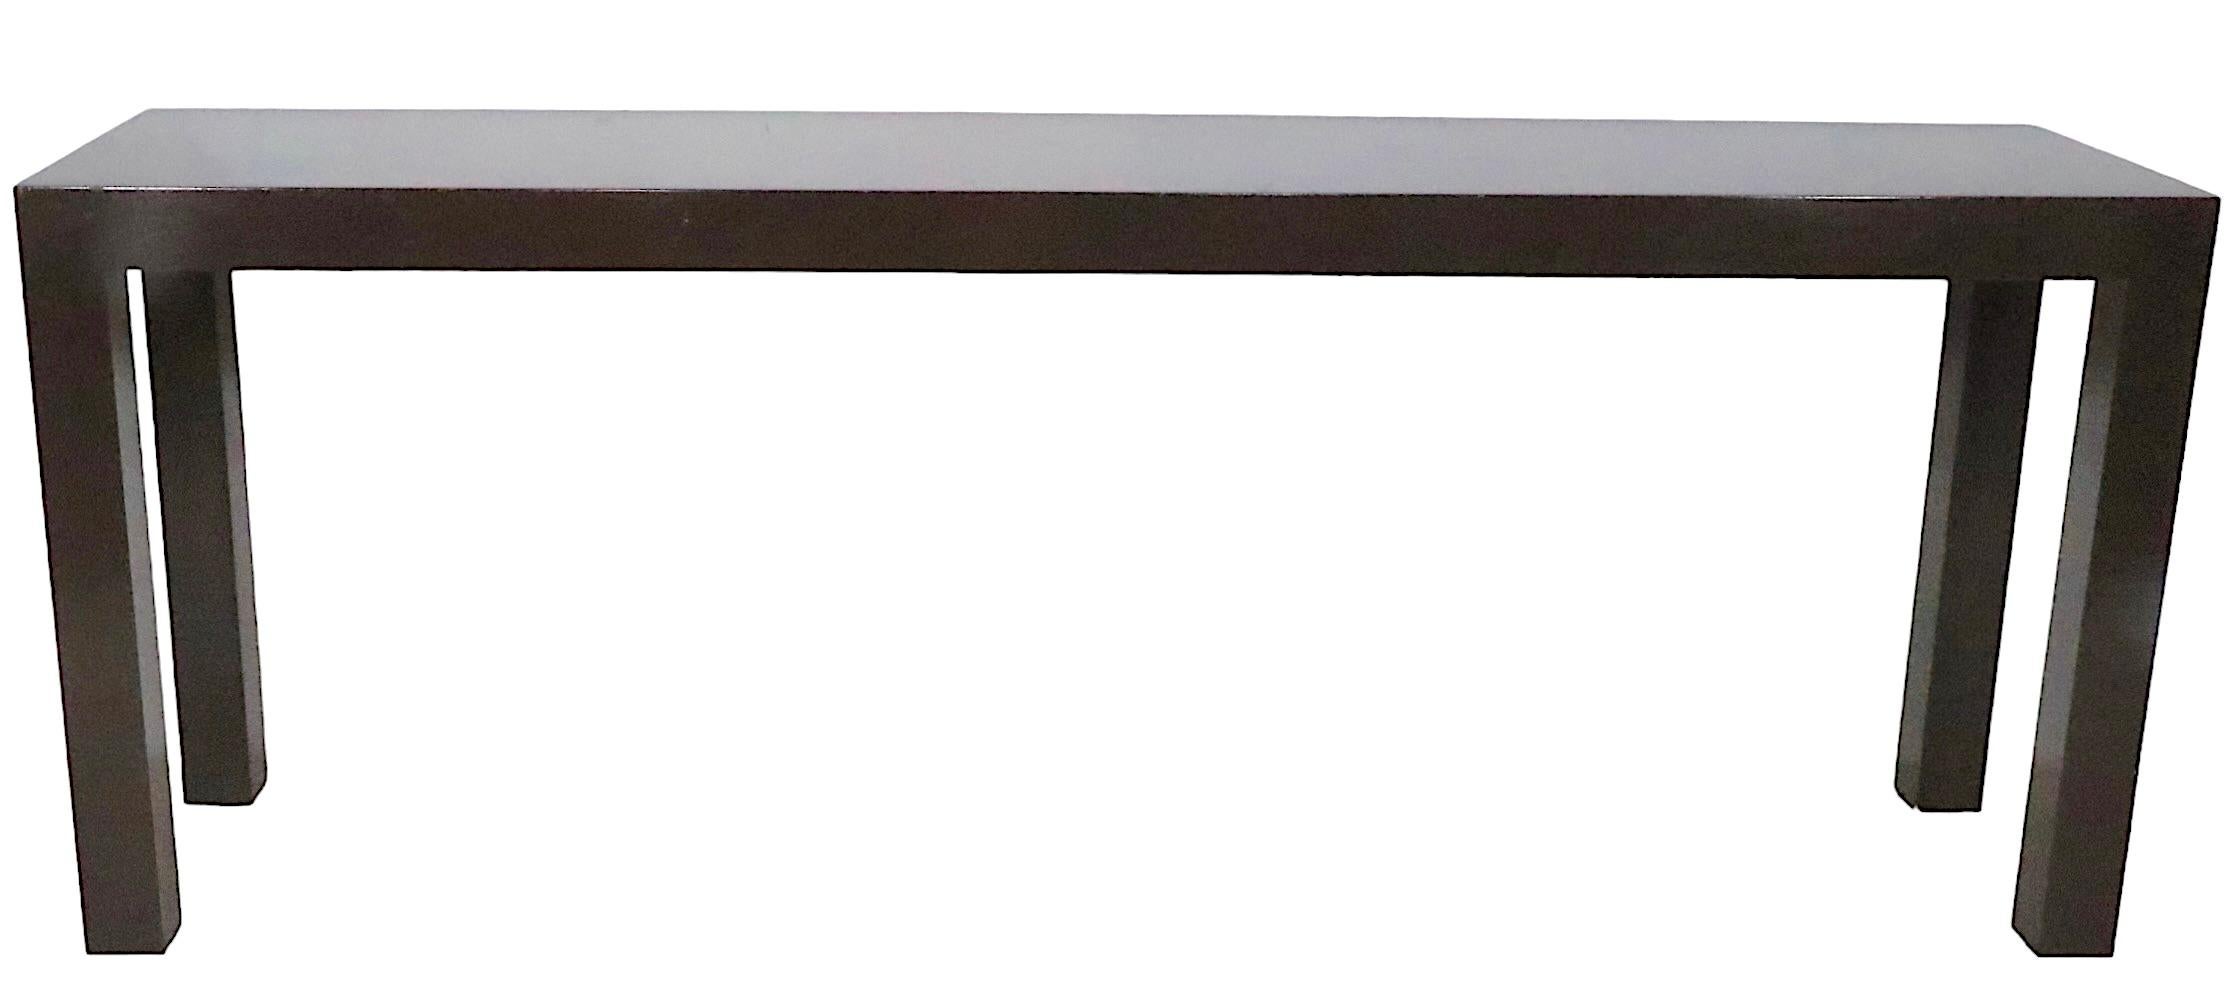 Parsons Style Console Table by Lane circa 1970’s In Good Condition For Sale In New York, NY